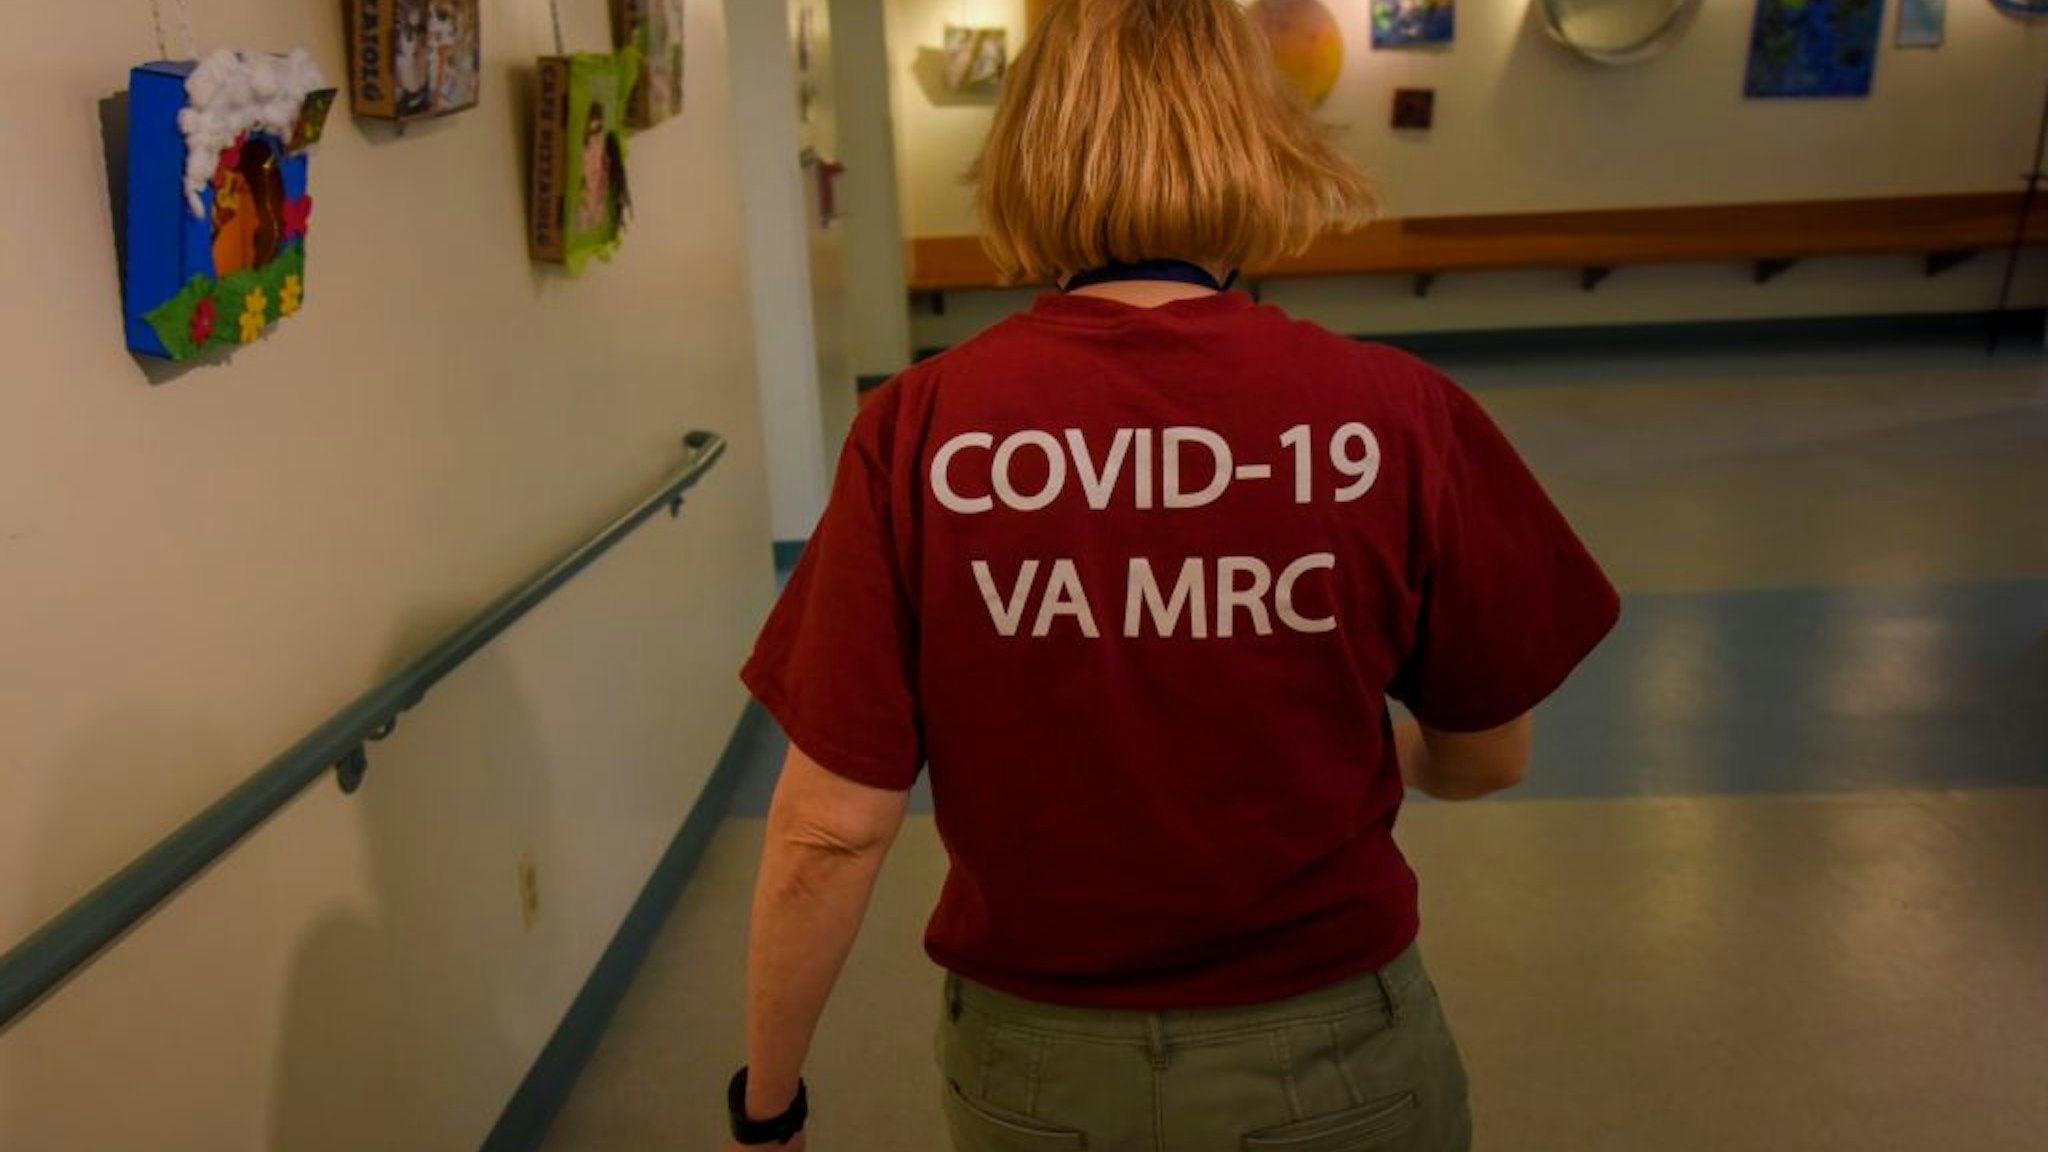 Seileen Mullen, with the Virginia medical reserve corps, passes through the halls where the Alexandria Health Department set up offices for coronavirus contact tracing and investigations at the Oswald Durant Arts Center in Alexandria, VA, on Wednesday, June 24, 2020.